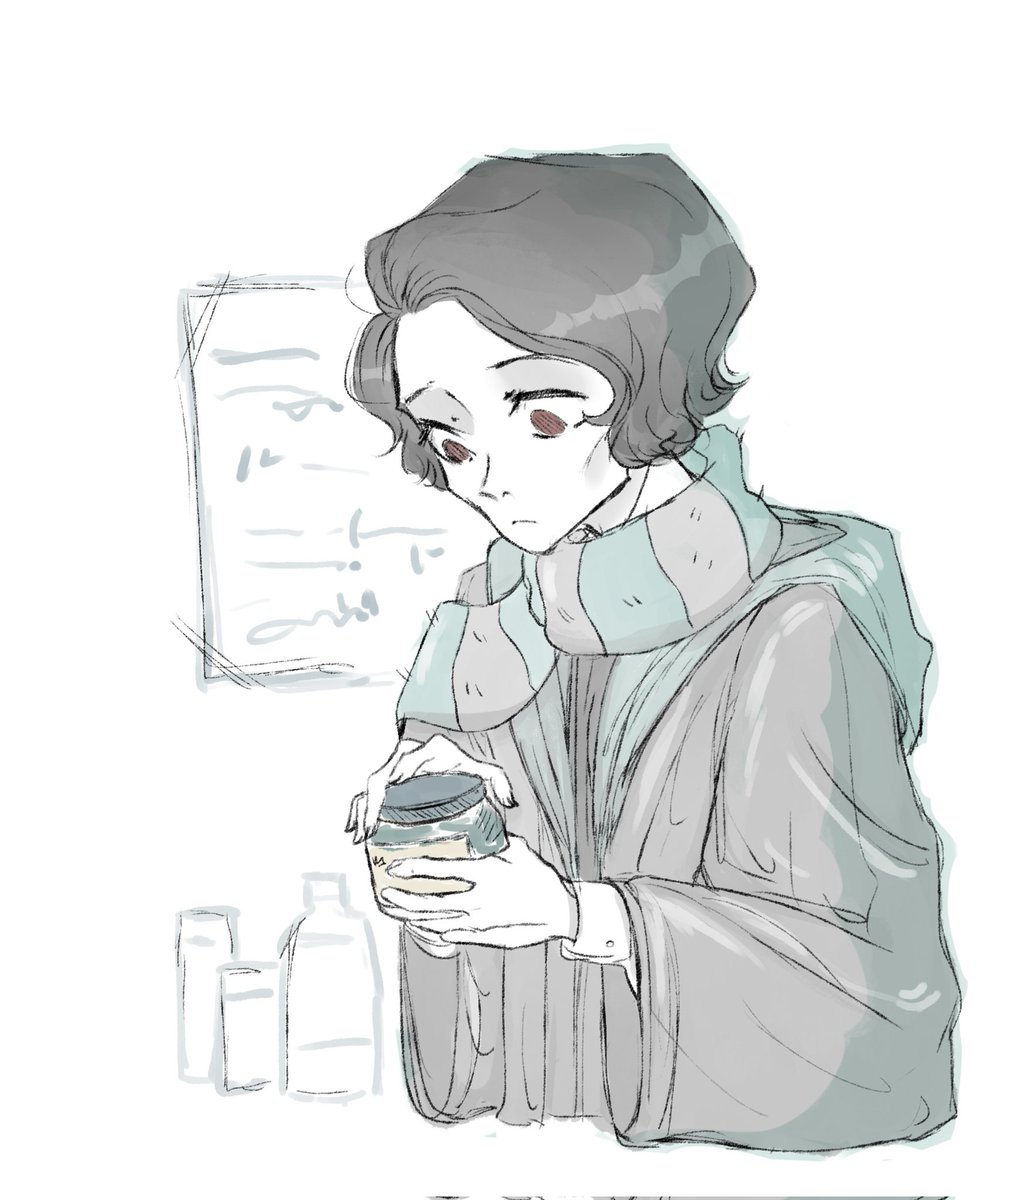 Ma baby will make some potions awww~
.
#tomriddle #tommarvoloriddle #tmr #digitalsketch #hpart #hpfanart